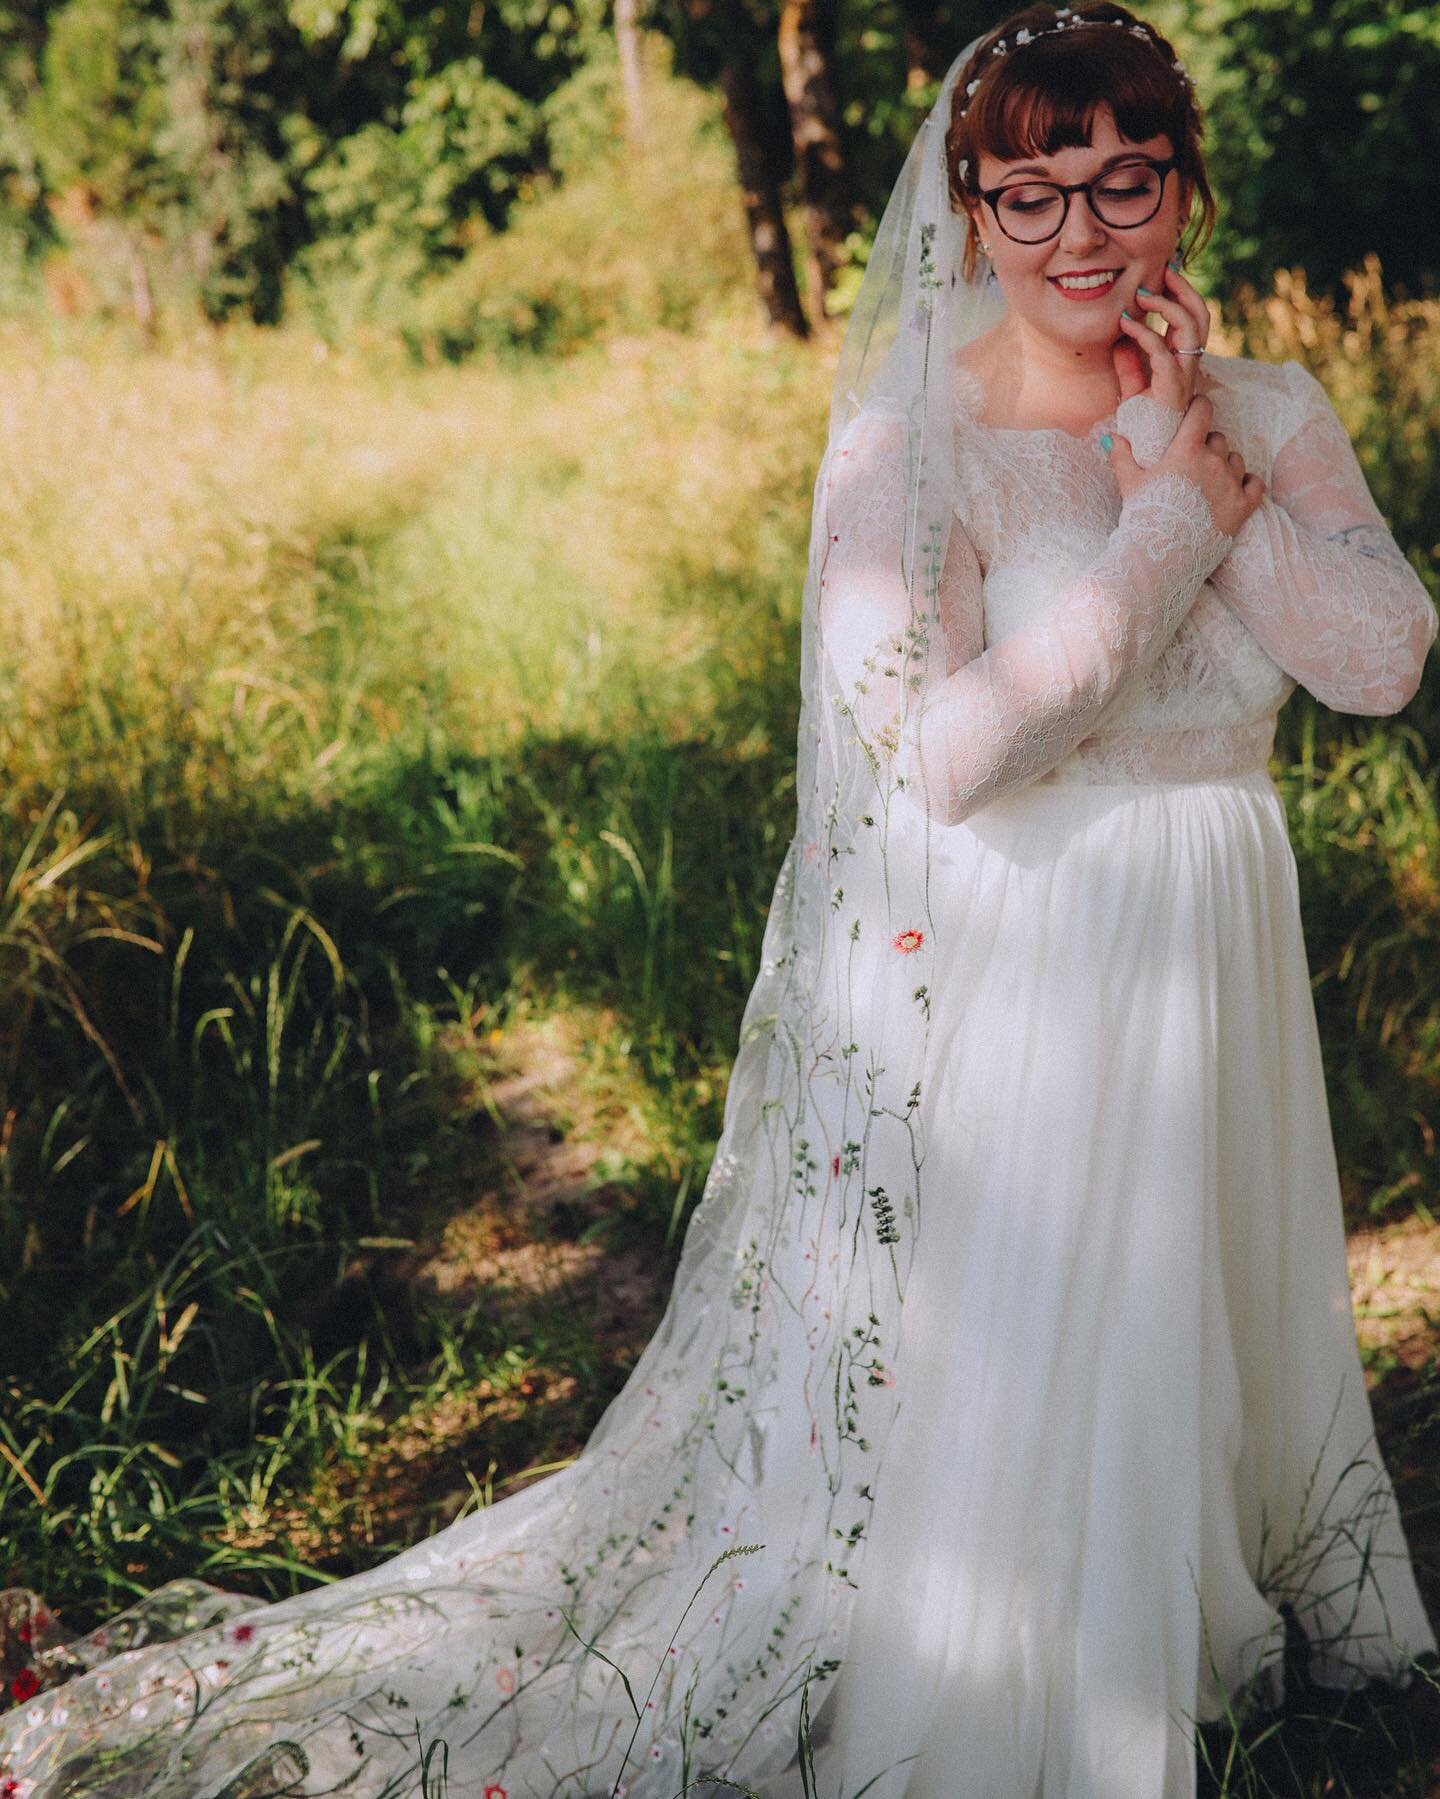 When Riley sent us her wedding photos, my jaw dropped! It&rsquo;s the romantic and bohemian wedding look of dreams, and I&rsquo;m just so excited she made it happen here at The English Dept! She&rsquo;s wearing an English Dept exclusive gown by @clai